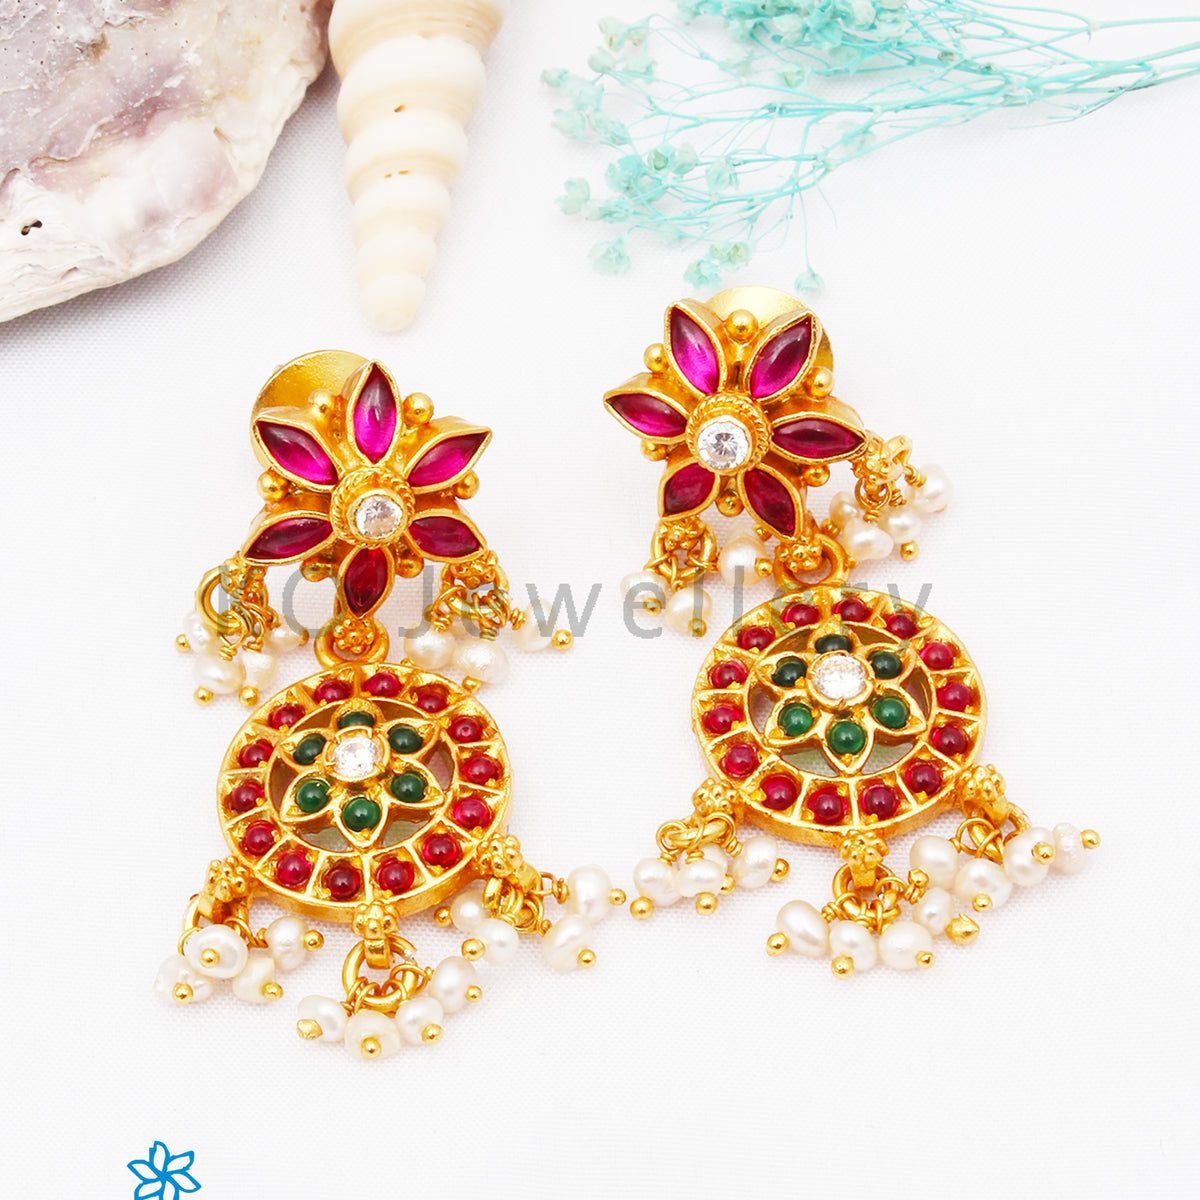 🤩One gram Jewellery.... Kempu studs...🤩😍....For more designs of 1 grm  jewellery and sarees plz have a look… | Indian wedding jewelry, Oxidised  jewellery, Jewelry